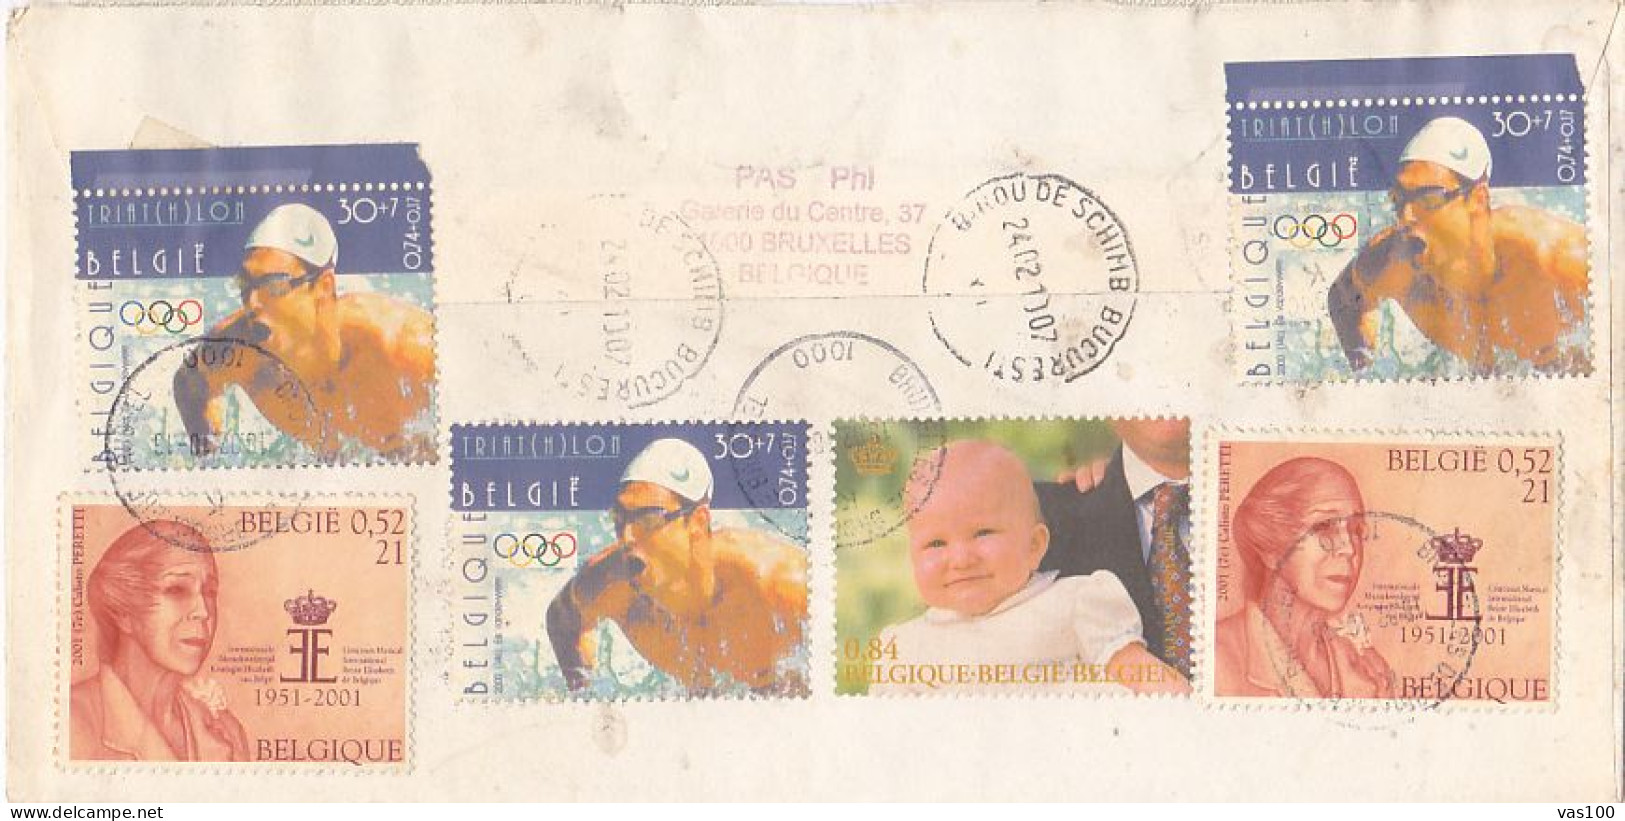 TRANSPORTS MINISTRIES CONFERENCE, SWIMMING, MUSIC, CHILDREN, STAMPS ON REGISTERED COVER, 2010, BELGIUM - Storia Postale